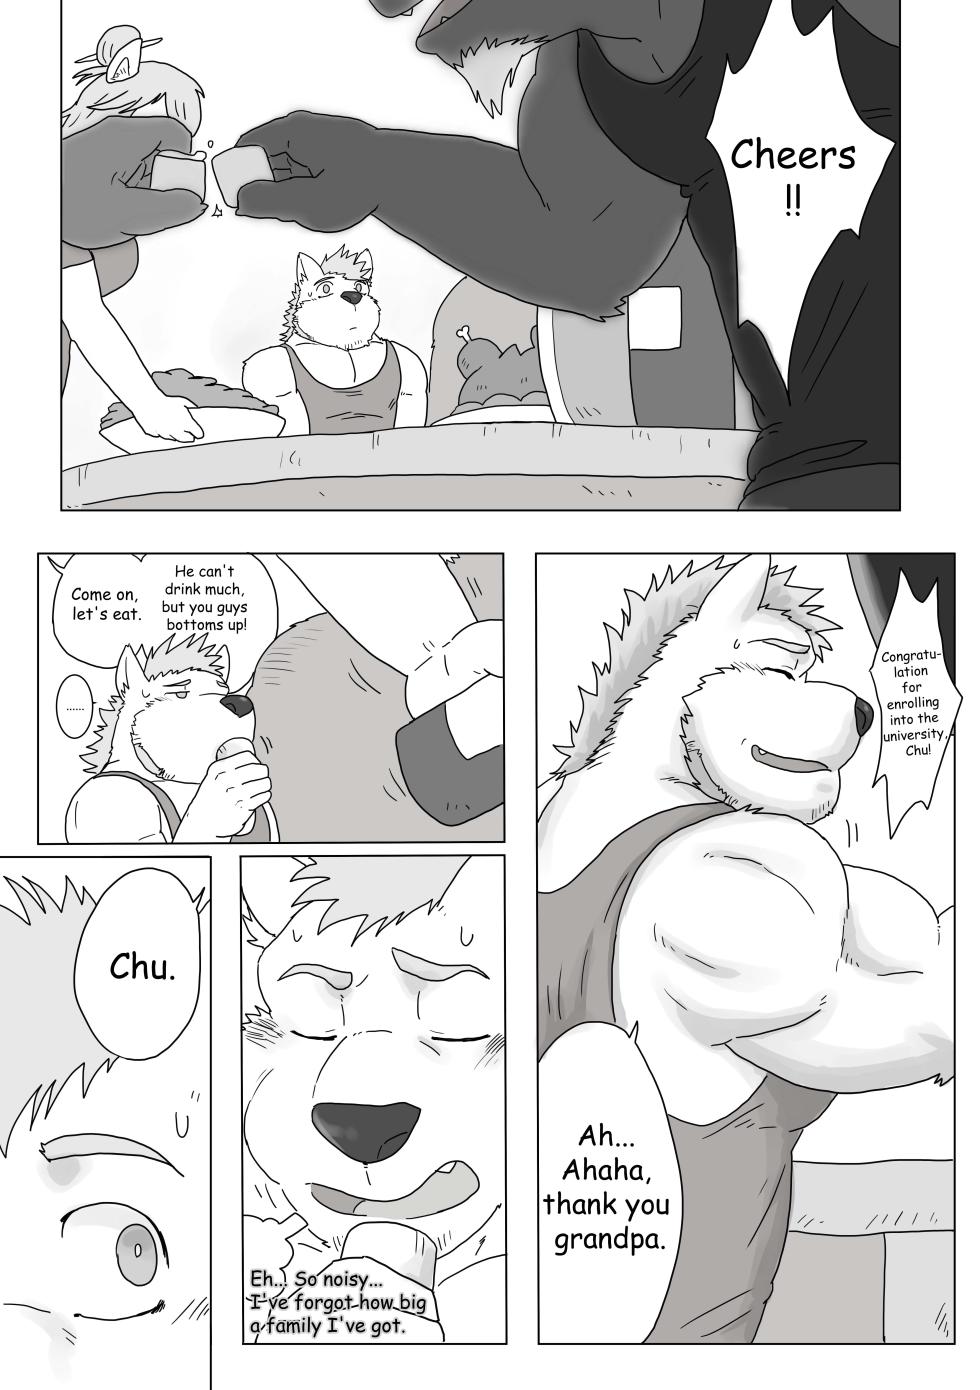 [Renoky] My hometown‘s uncle is a Horny Hung!! [English] [Decensored] [Digital] - Page 2